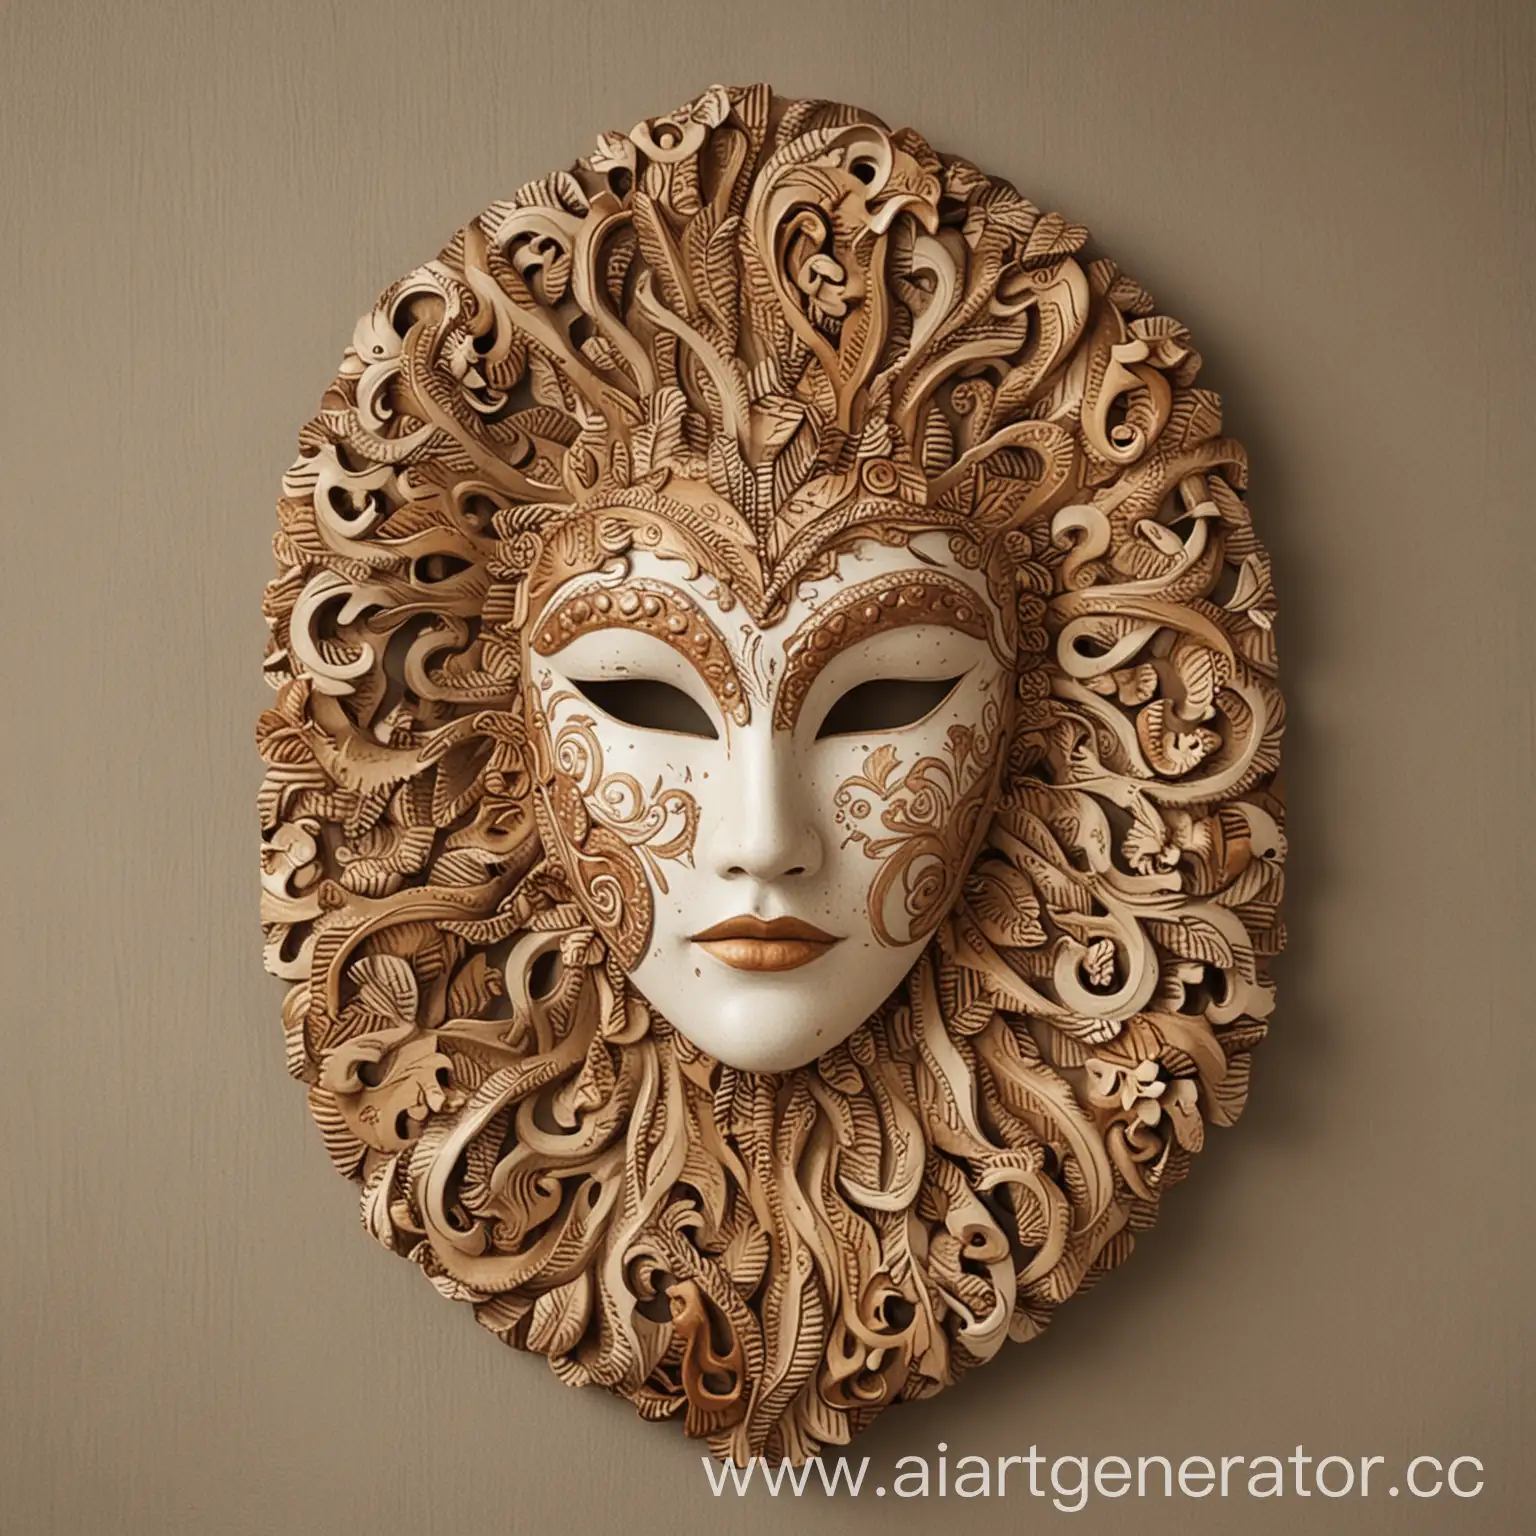 Warmth-and-Kindness-Expressed-Through-Decorative-Wall-Mask